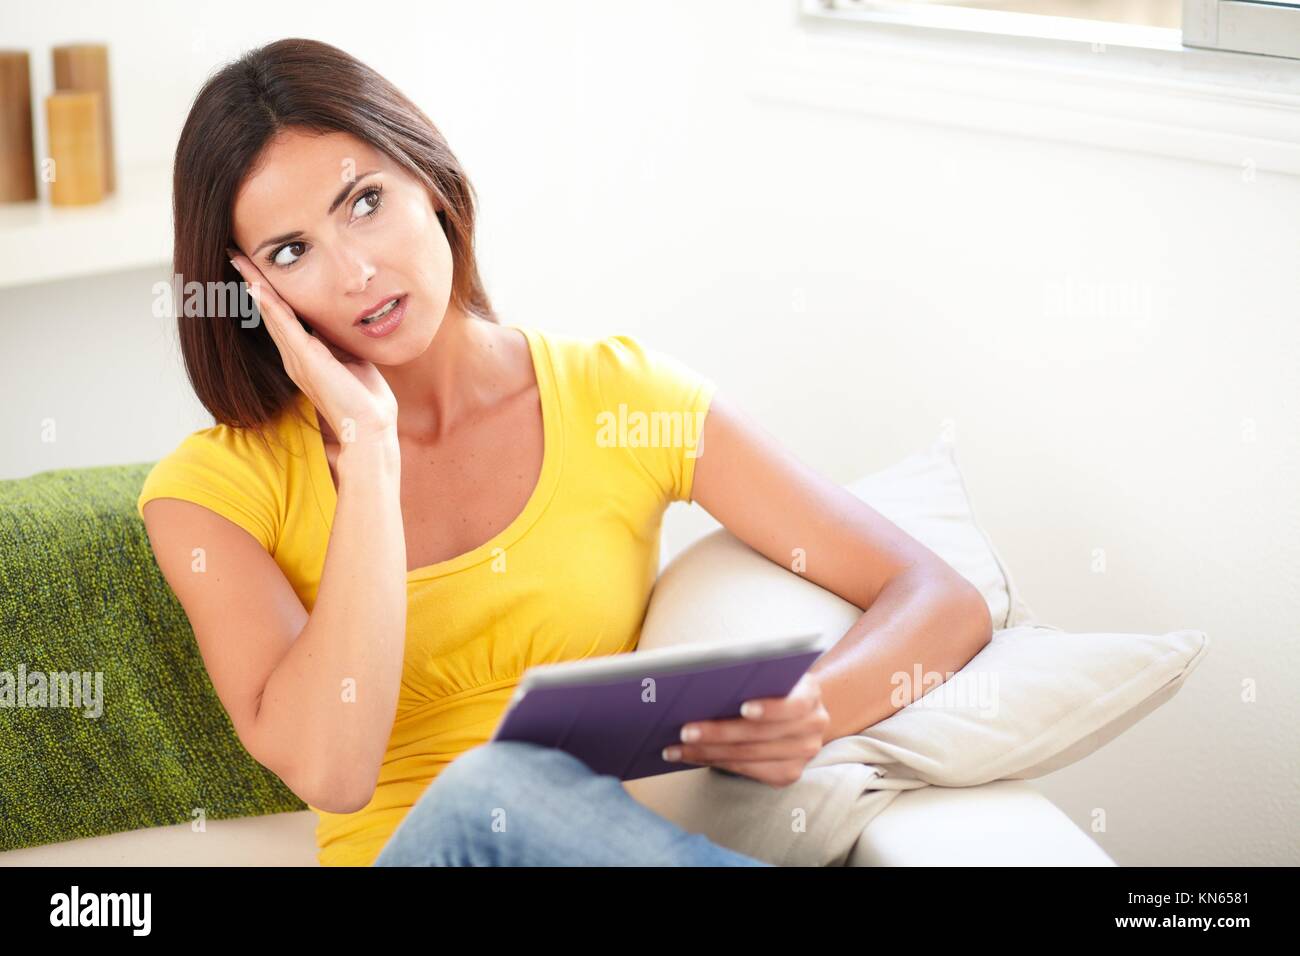 Surprised lady in yellow tank top holding a tablet while looking away from the camera - copy space. Stock Photo